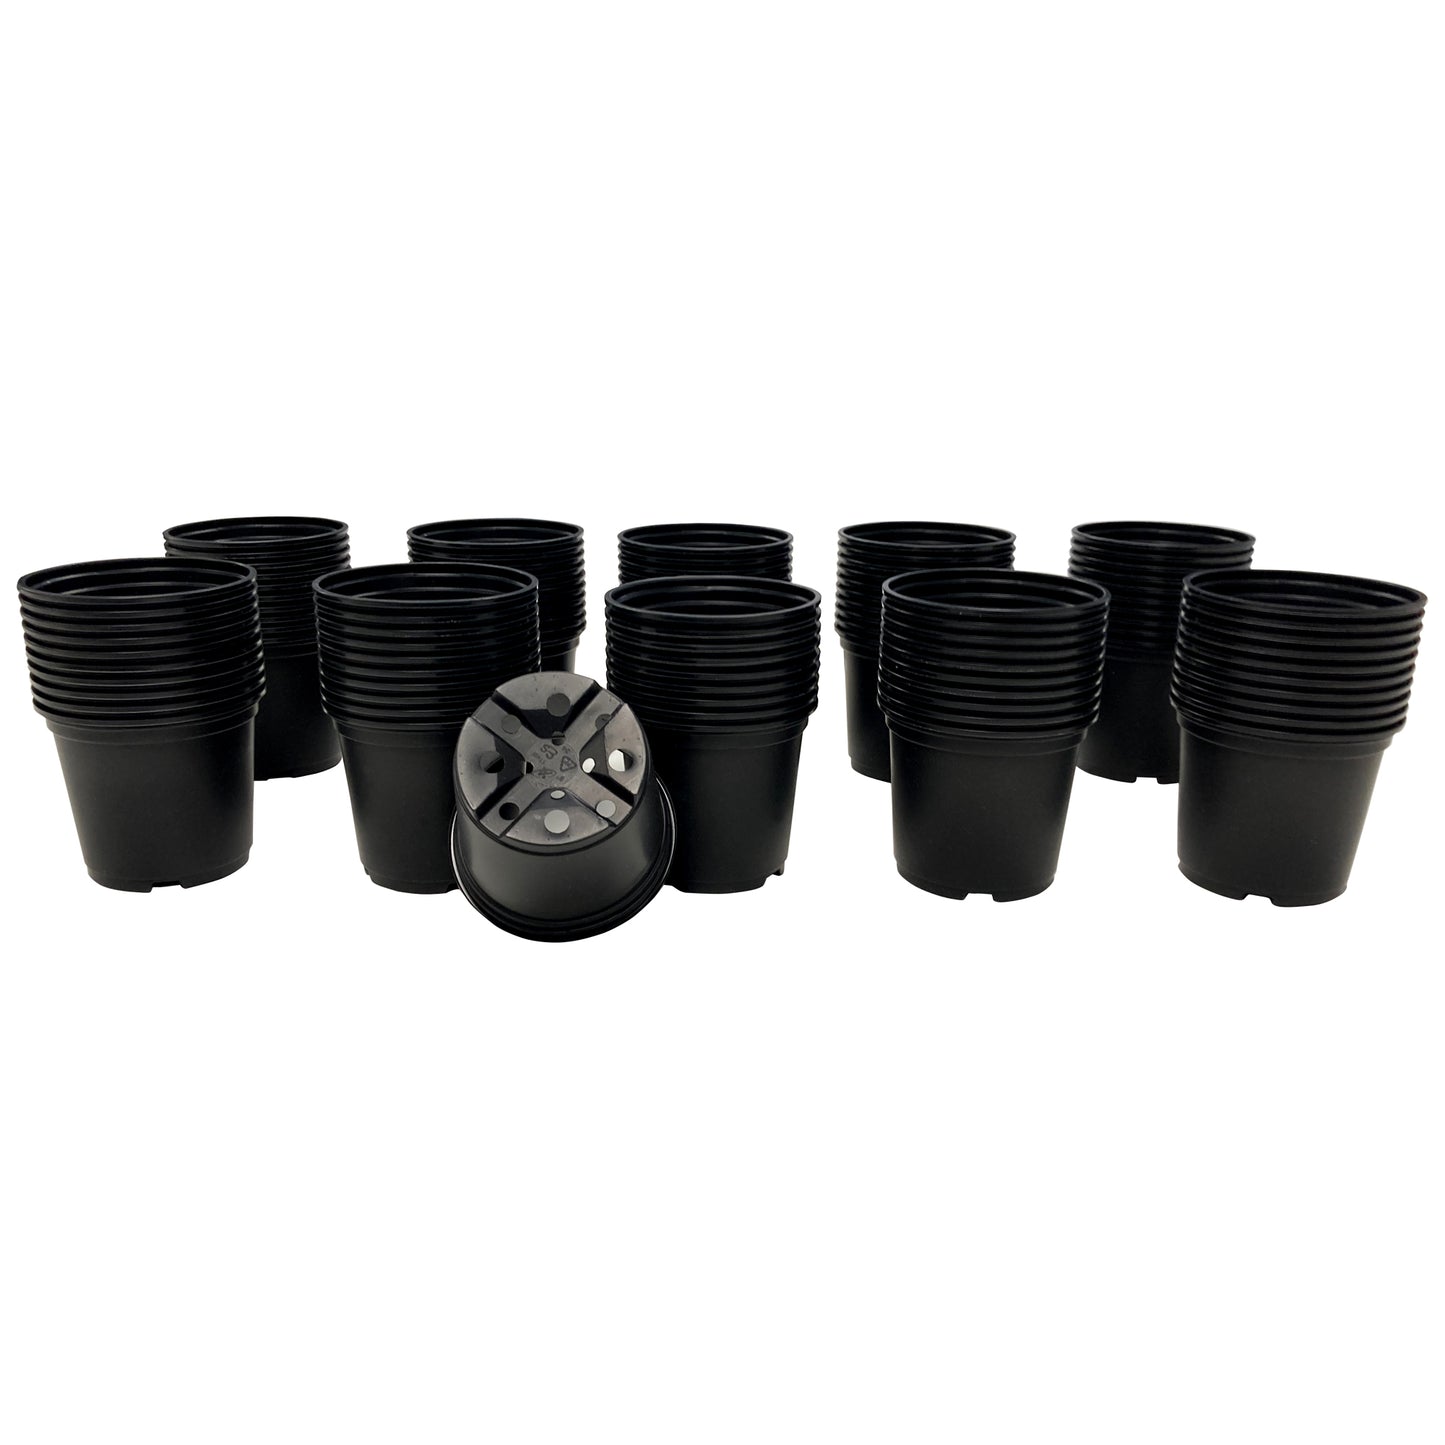 Thermo Formed Growing Pots - Recycled Plastic & Made in the UK